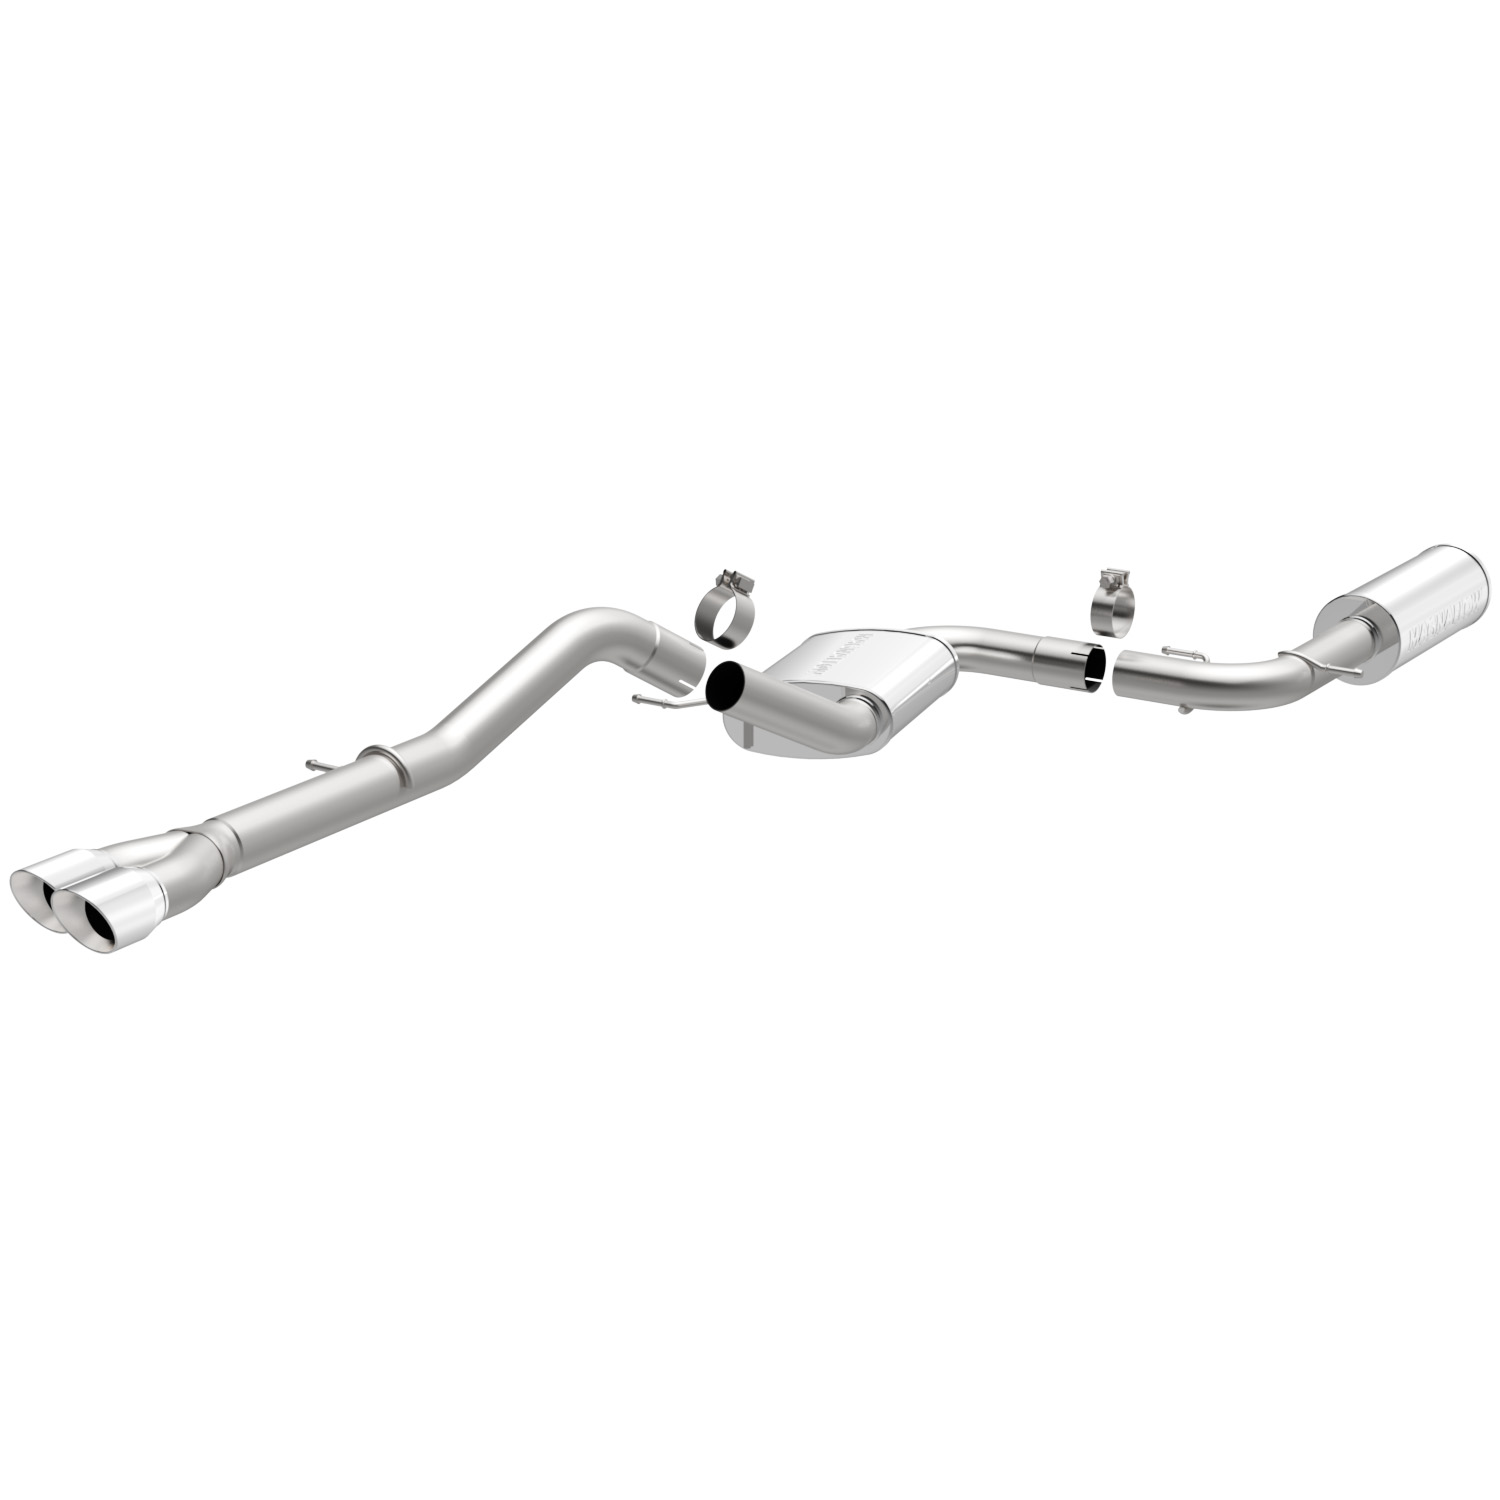 Touring Series Cat-Back Exhaust System 2012-14 VW Beetle 2.5L L5 (Excludes Convertible)